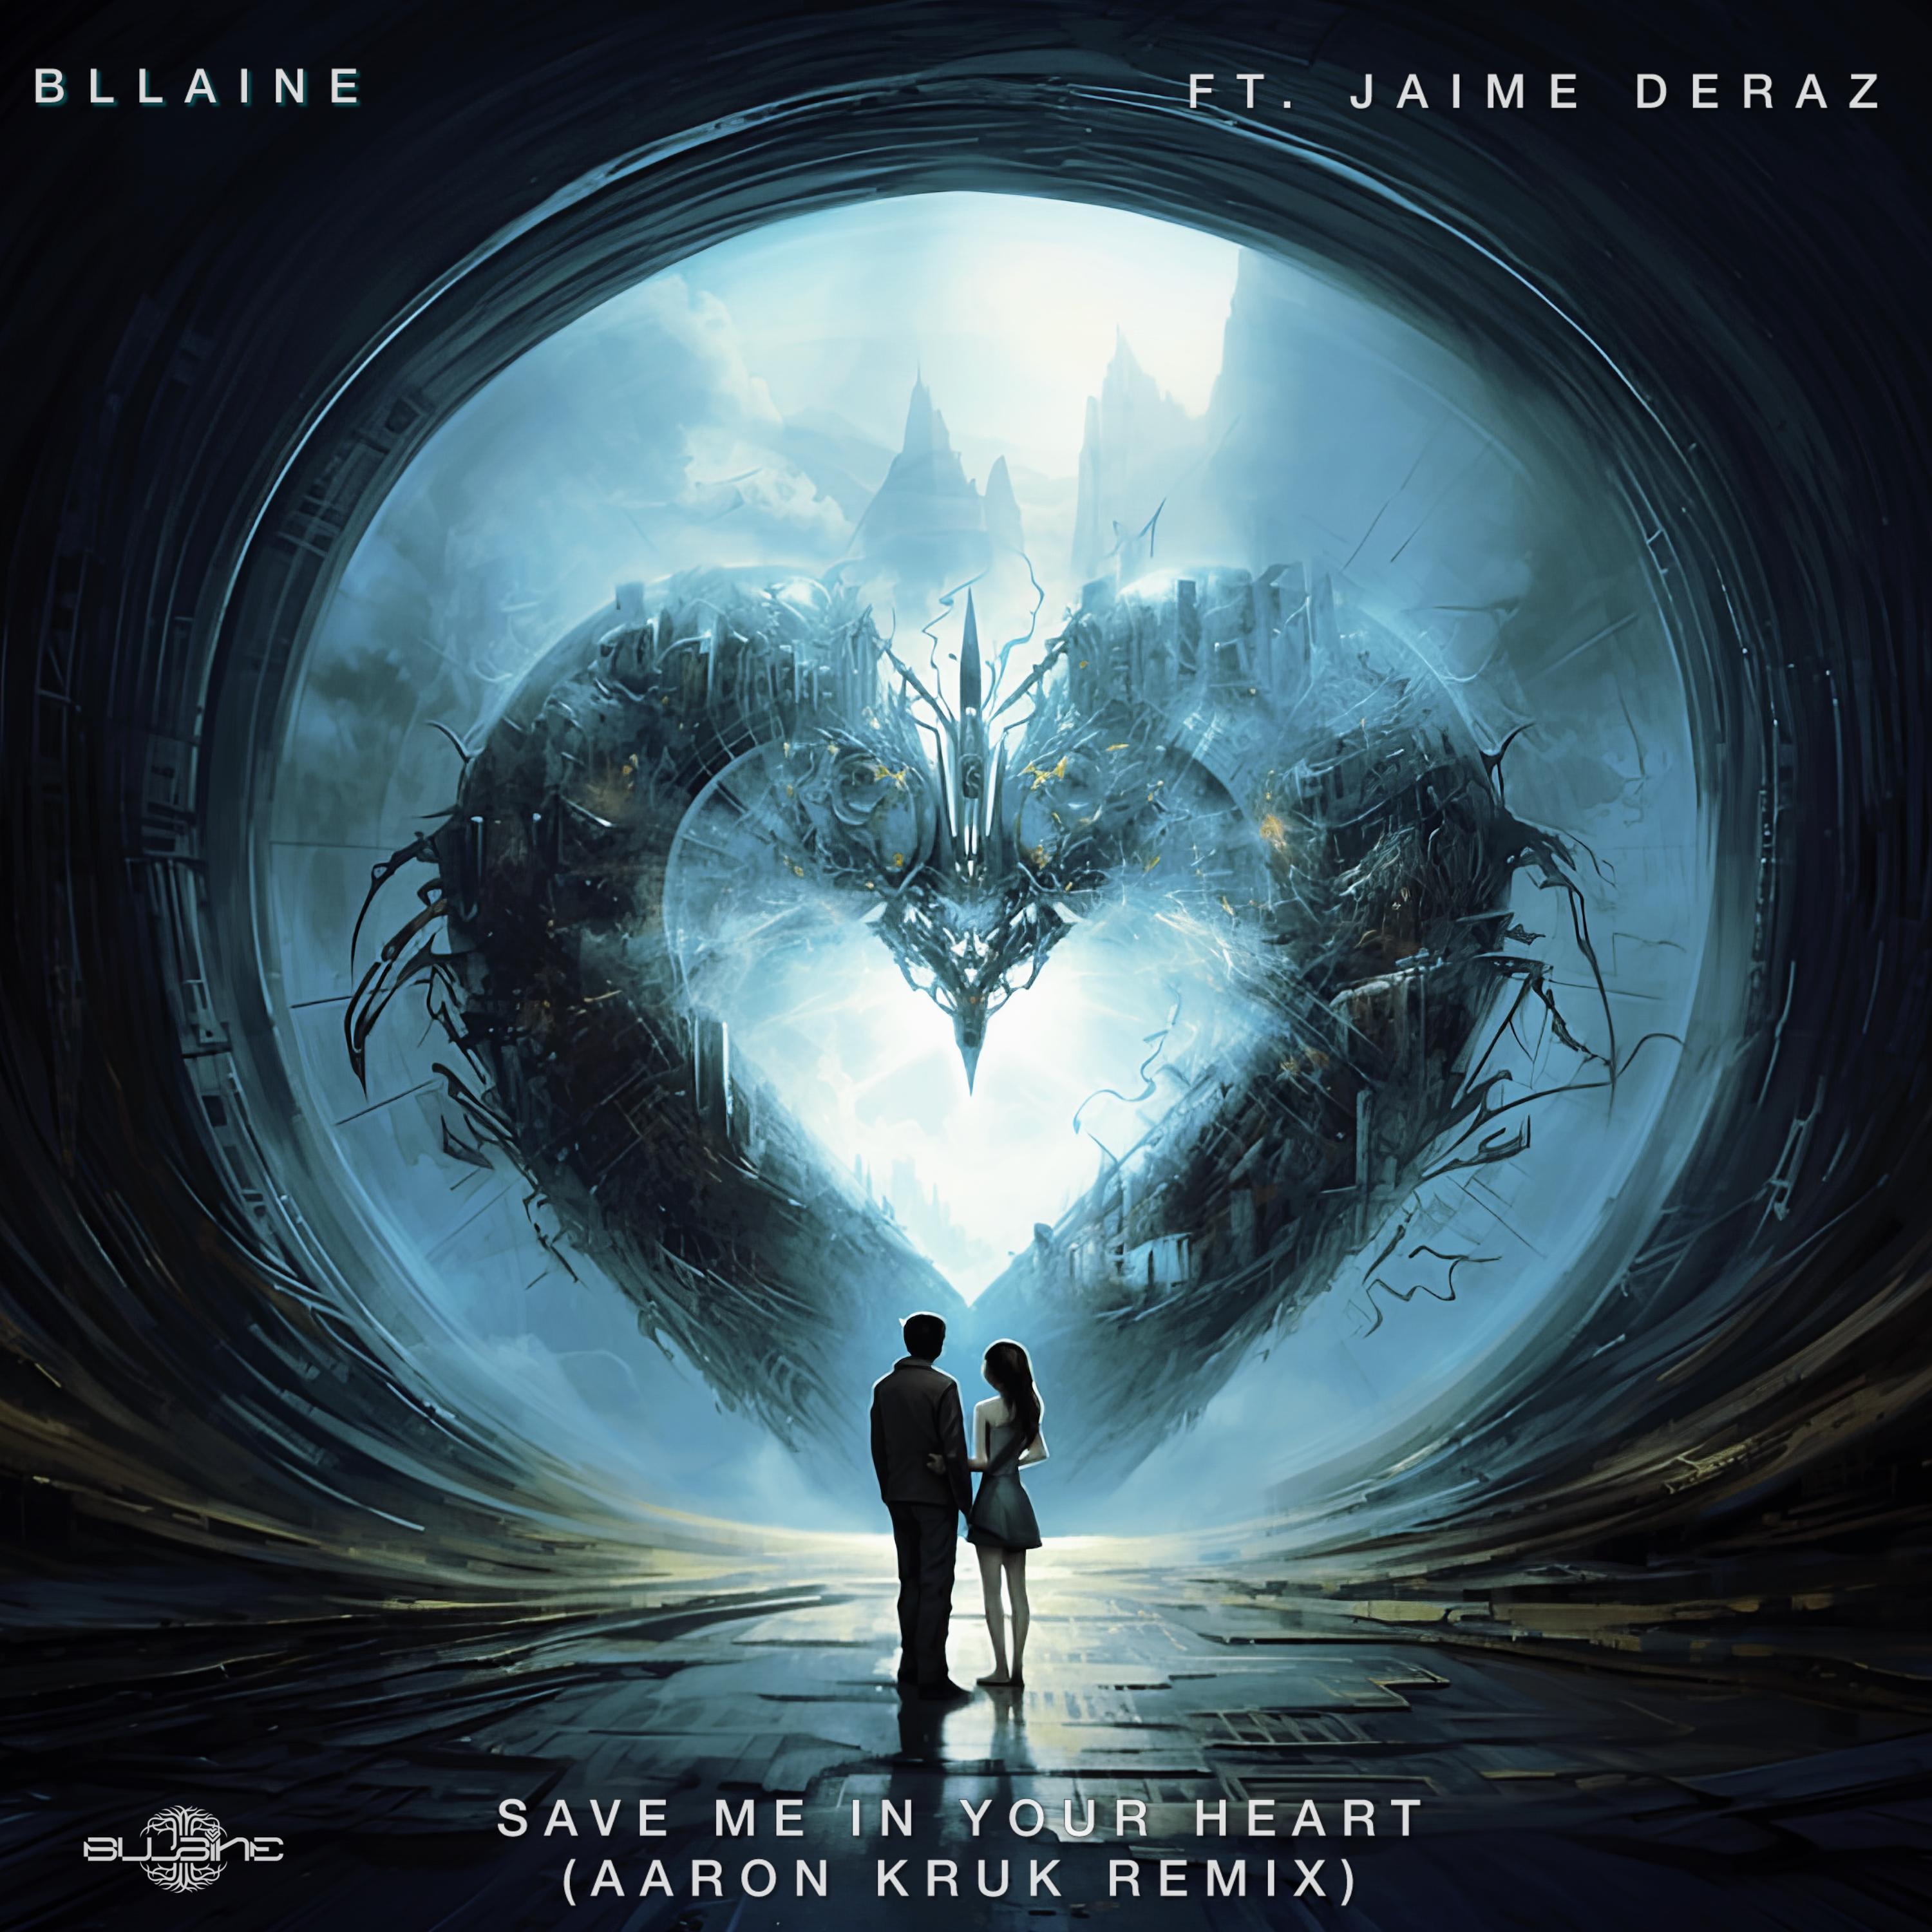 Bllaine - Save Me In Your Heart (Aaron Kruk Remix)